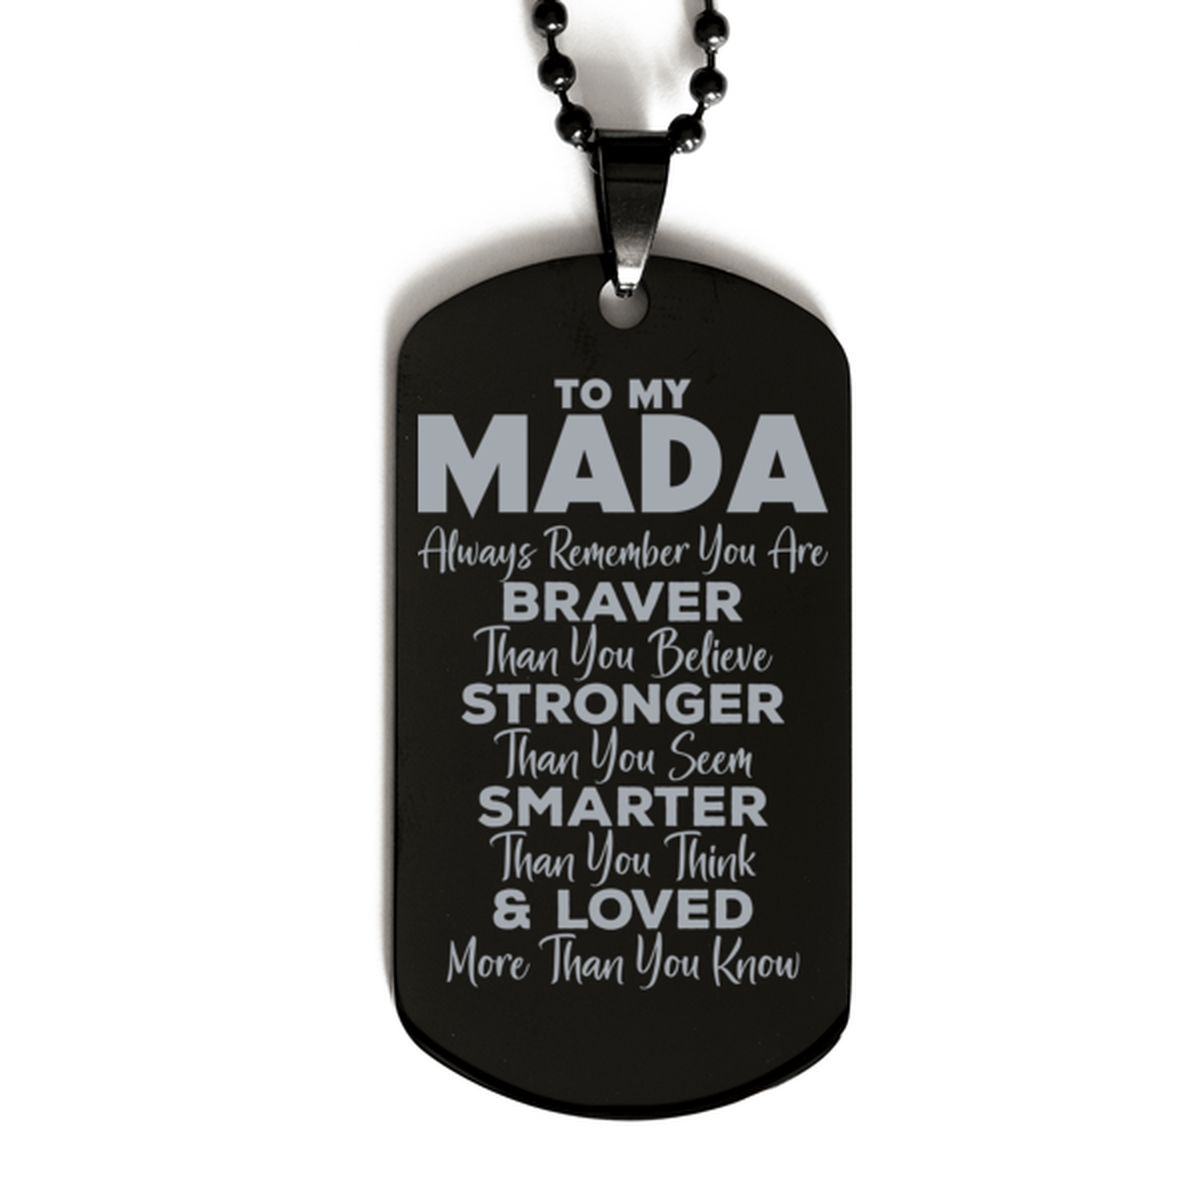 Motivational Mada Black Dog Tag Necklace, Mada Always Remember You Are Braver Than You Believe, Best Birthday Gifts for Mada